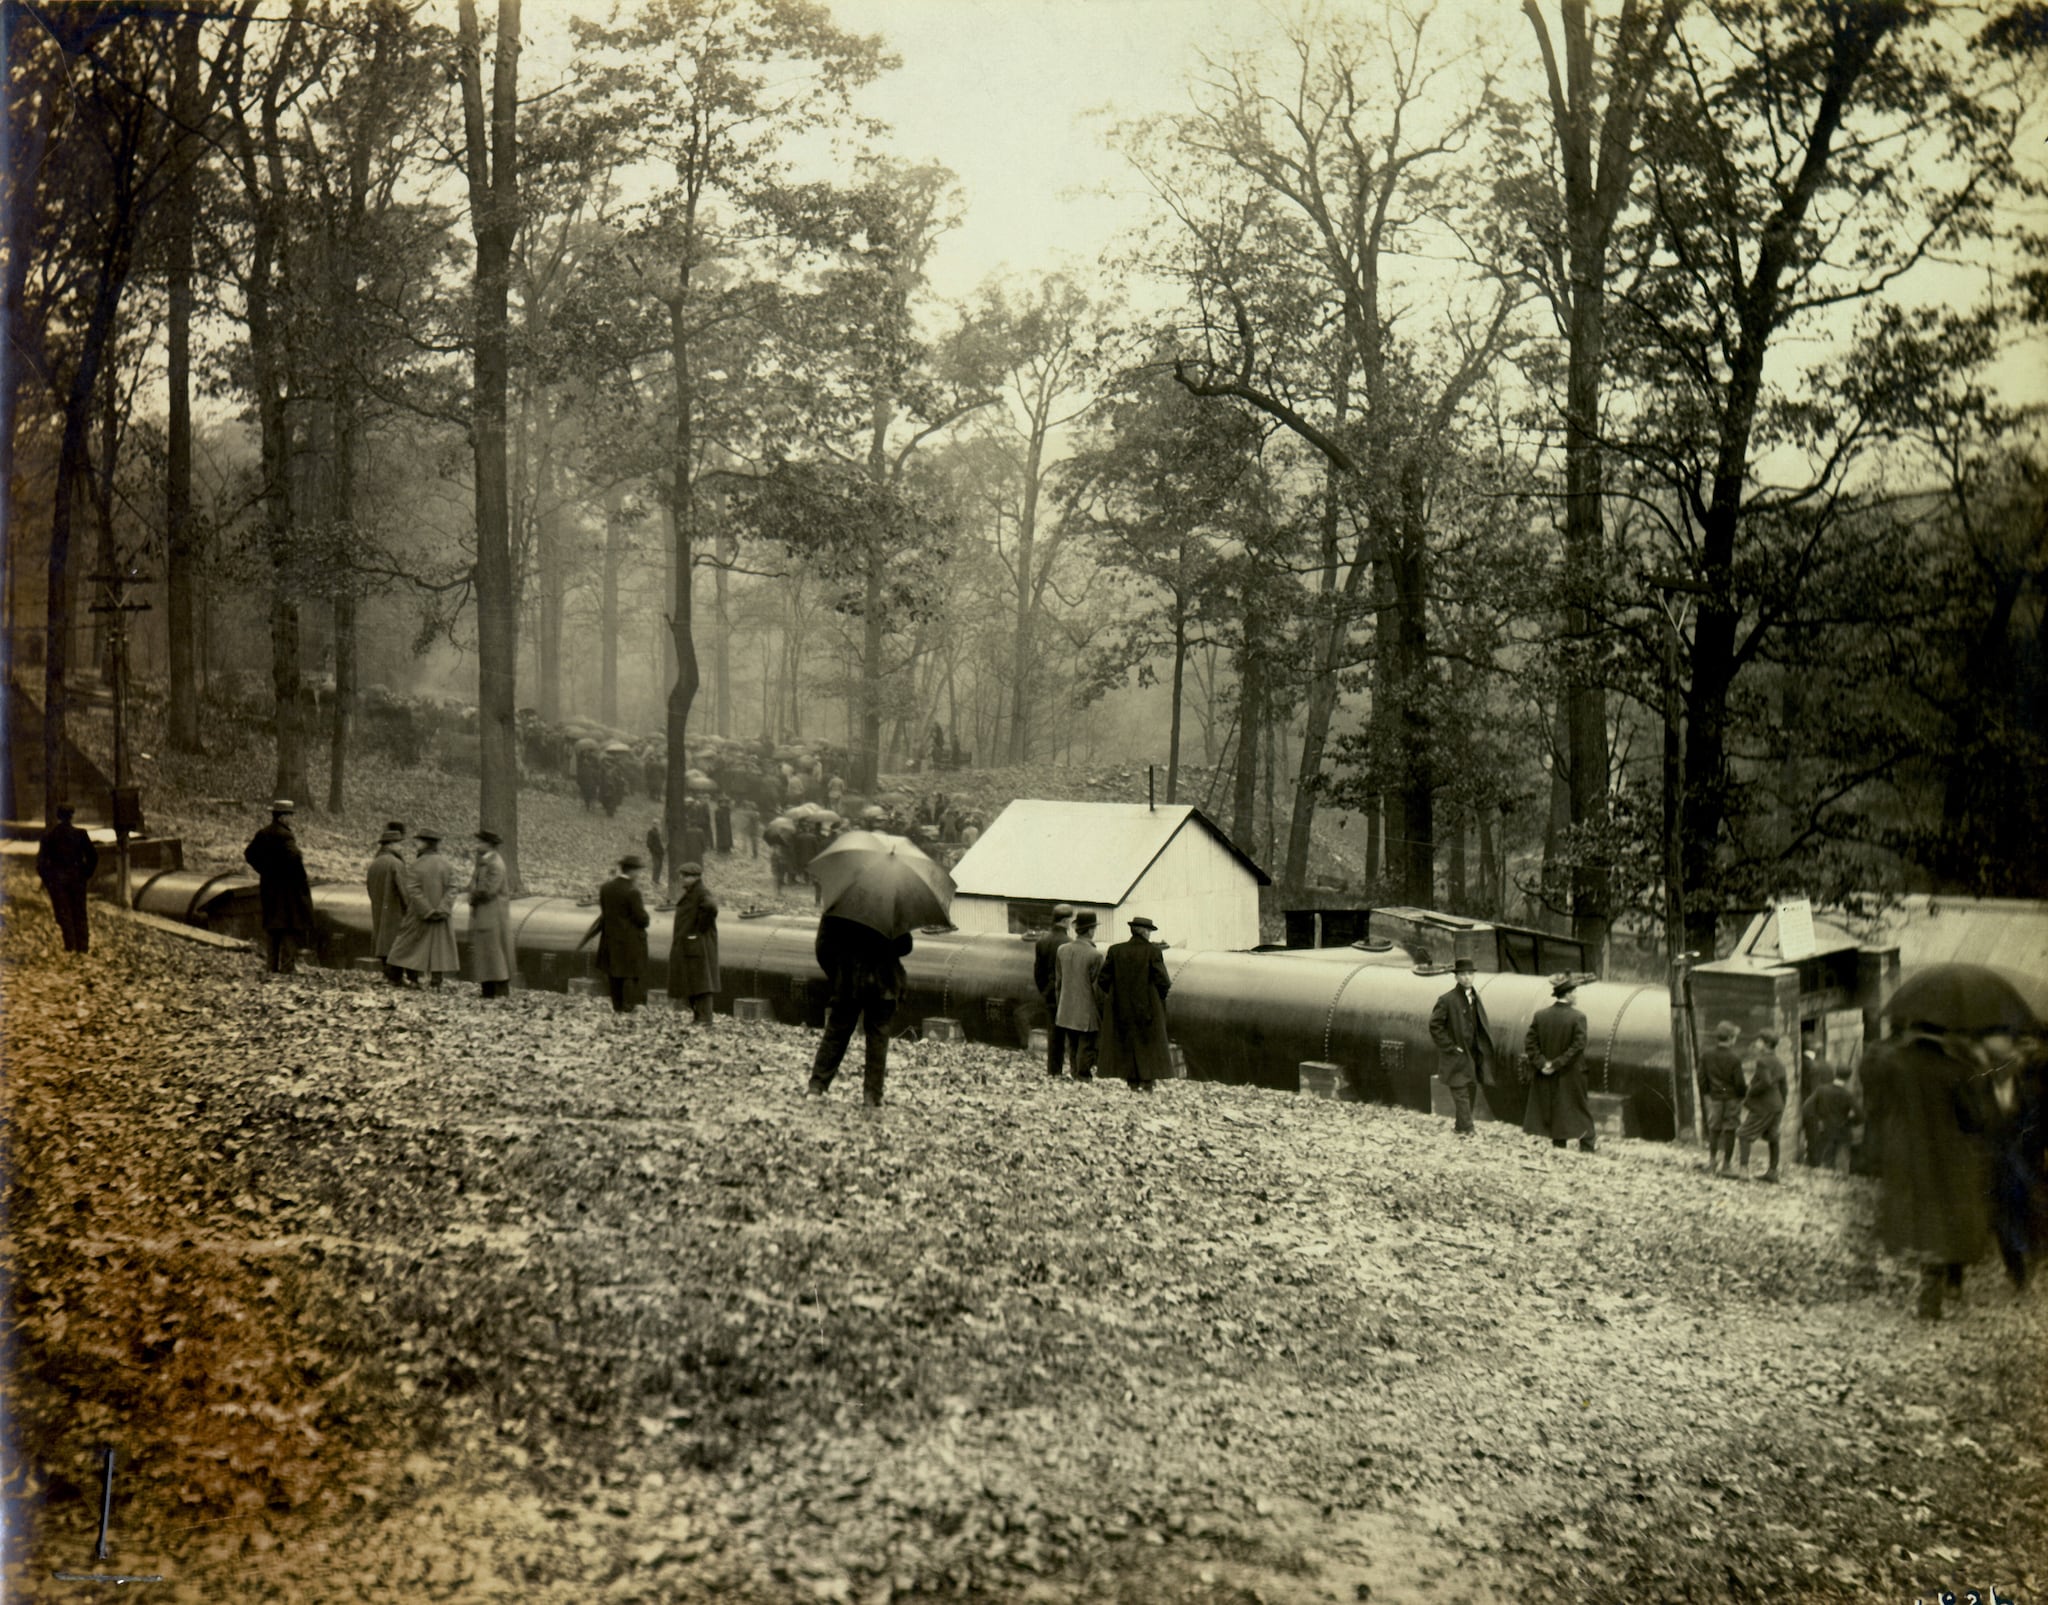 Historical photo of spectators with umbrellas gathering to watch testing outdoors